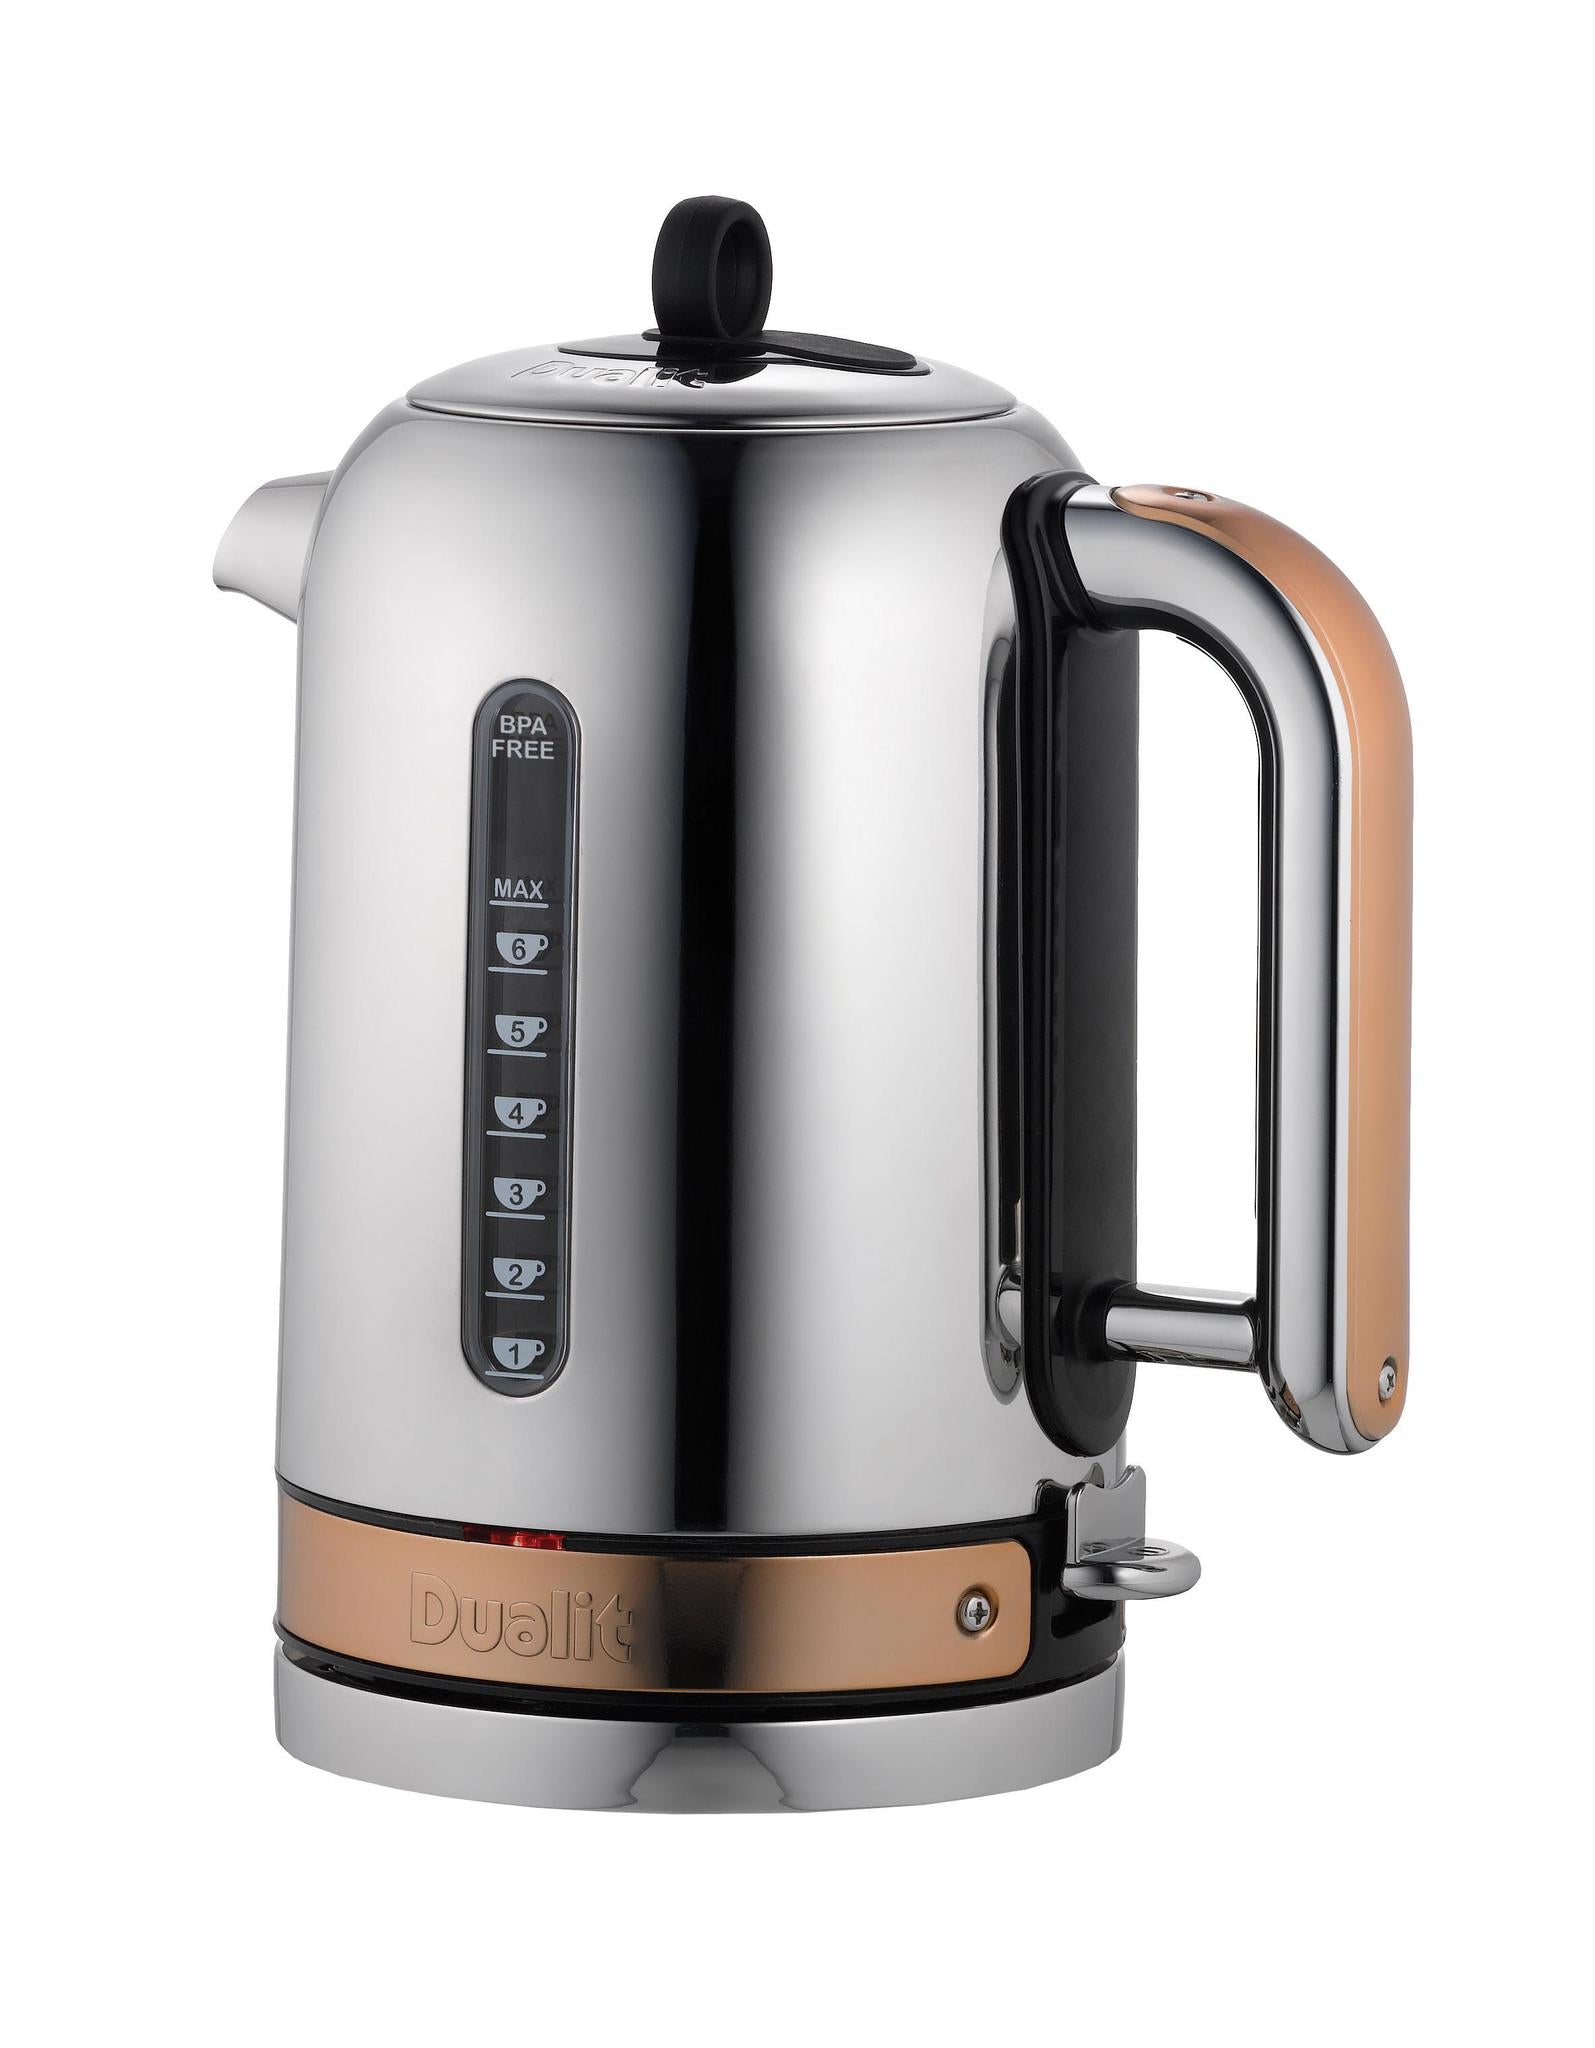 Dualit Classic Kettle - Copper Panel – The Seasoned Gourmet